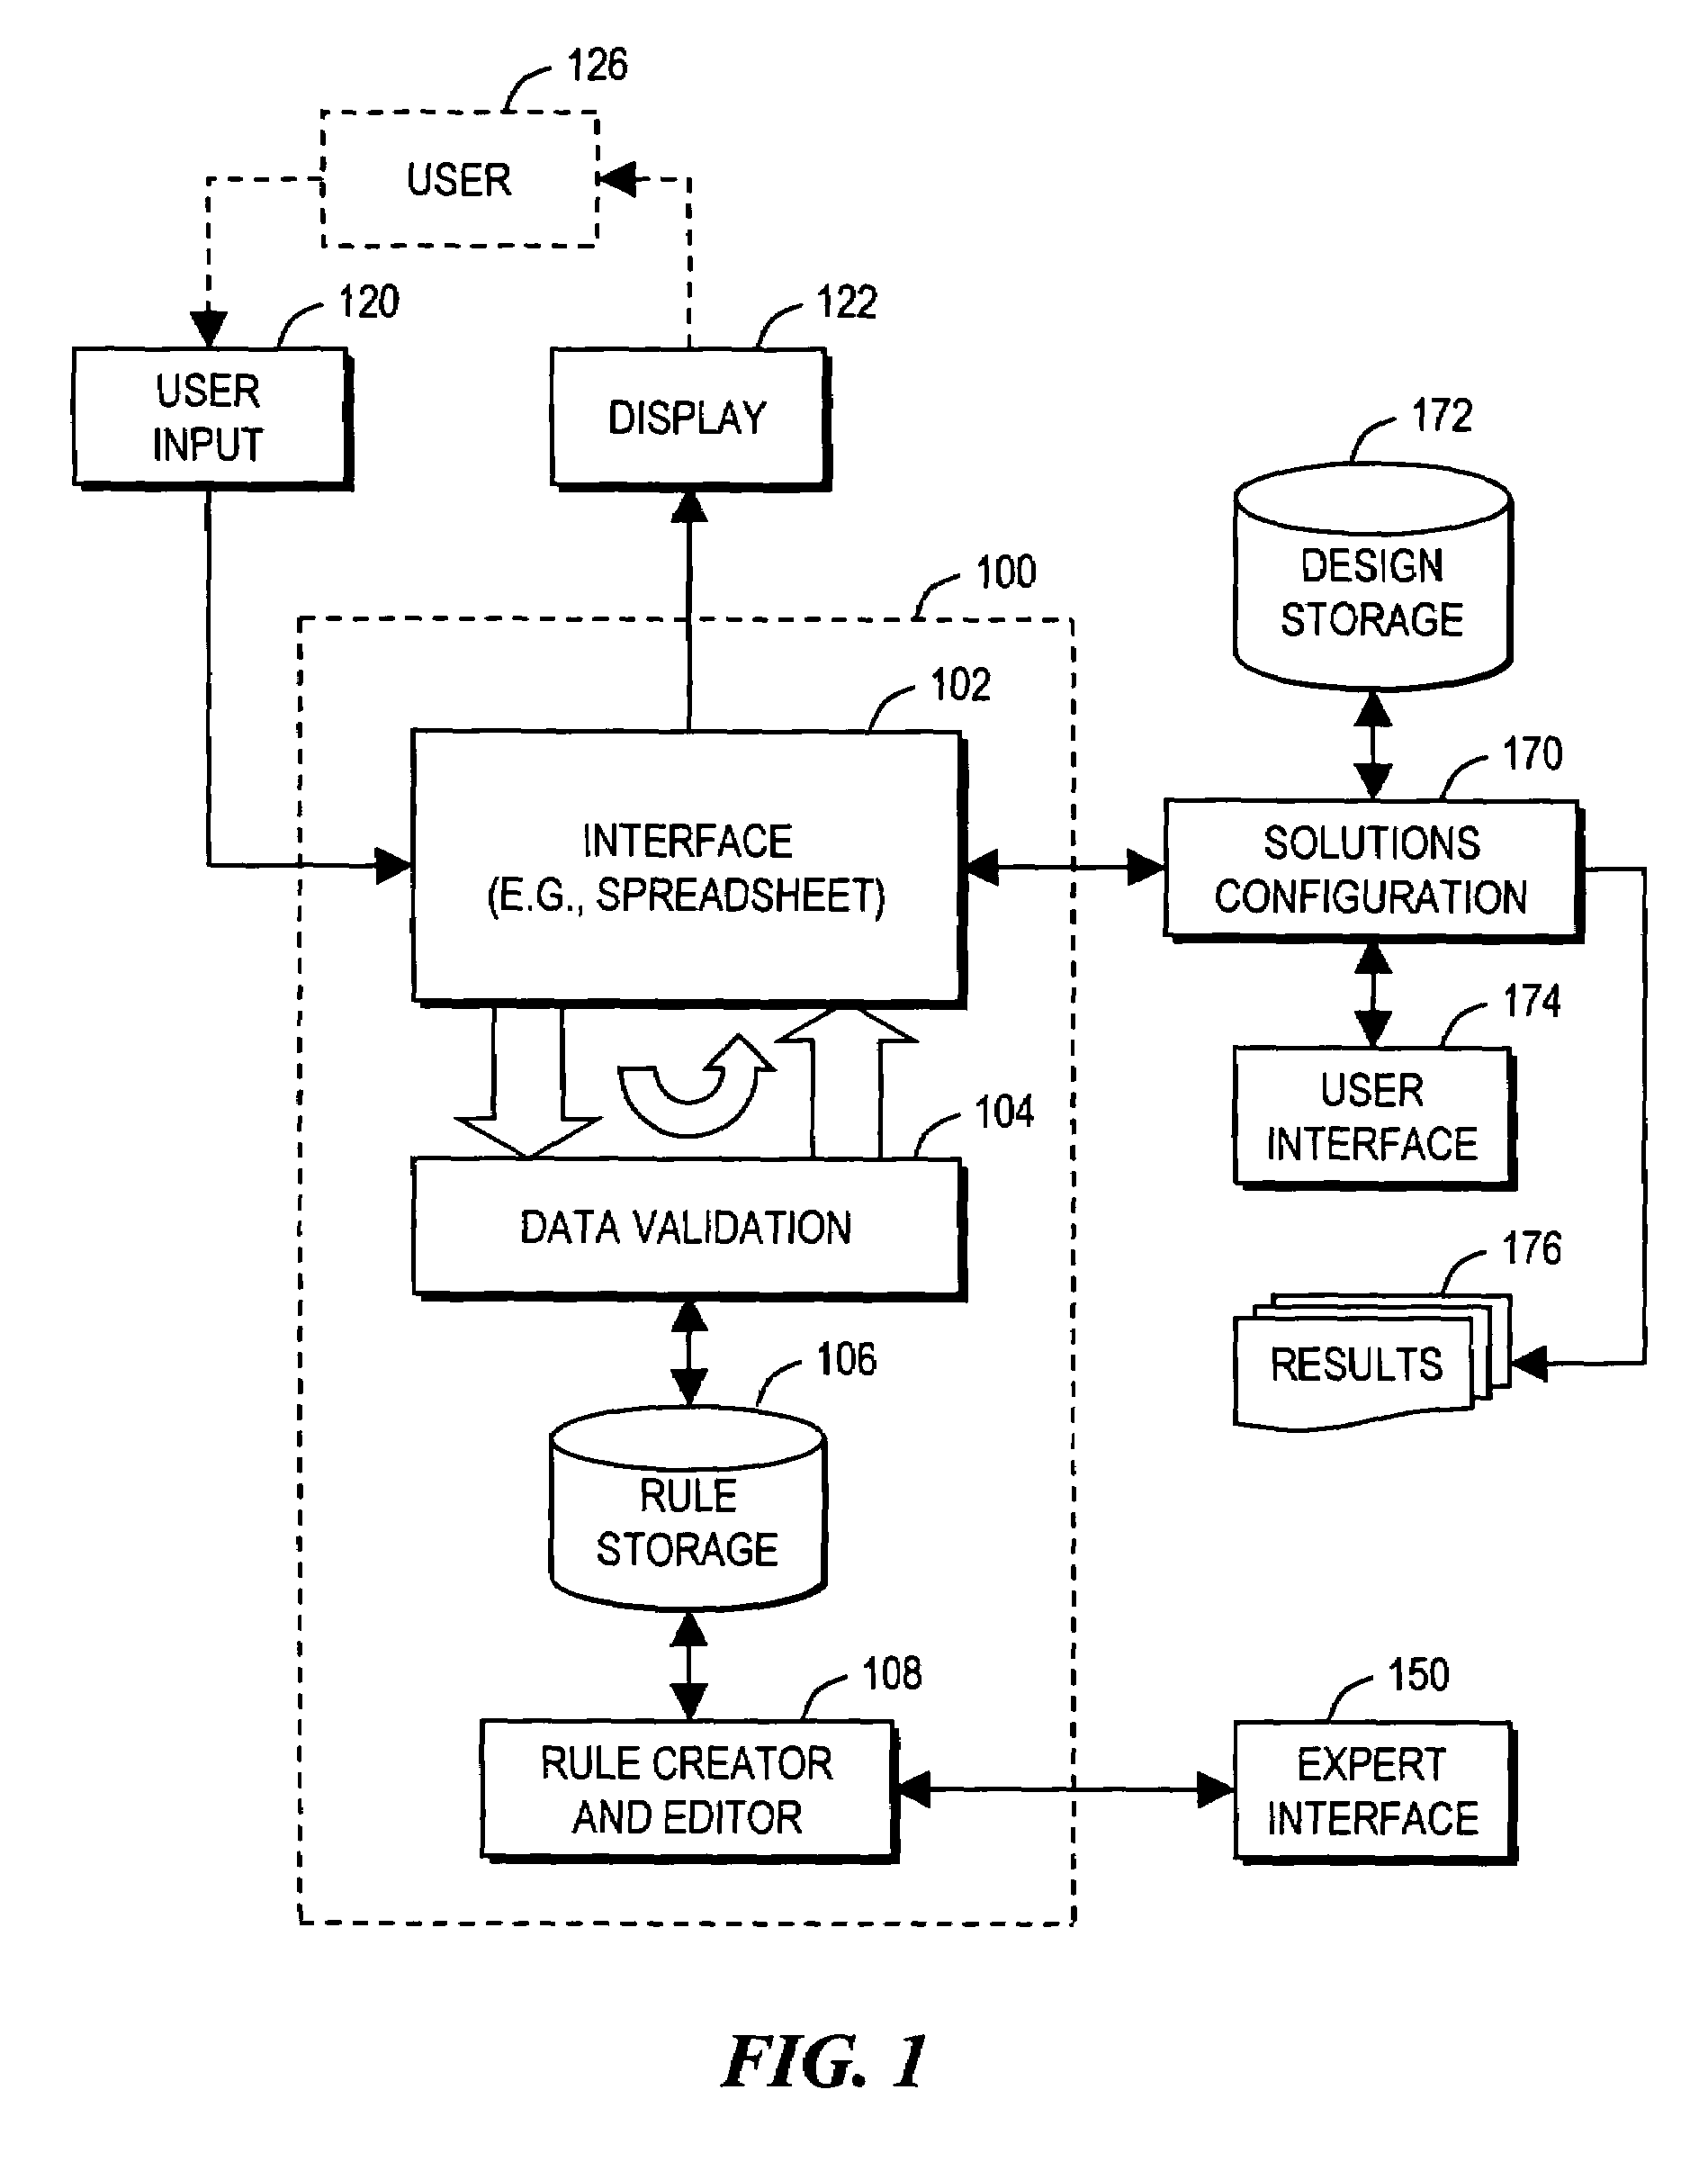 Arrangement for guiding user design of comprehensive product solution using on-the-fly data validation